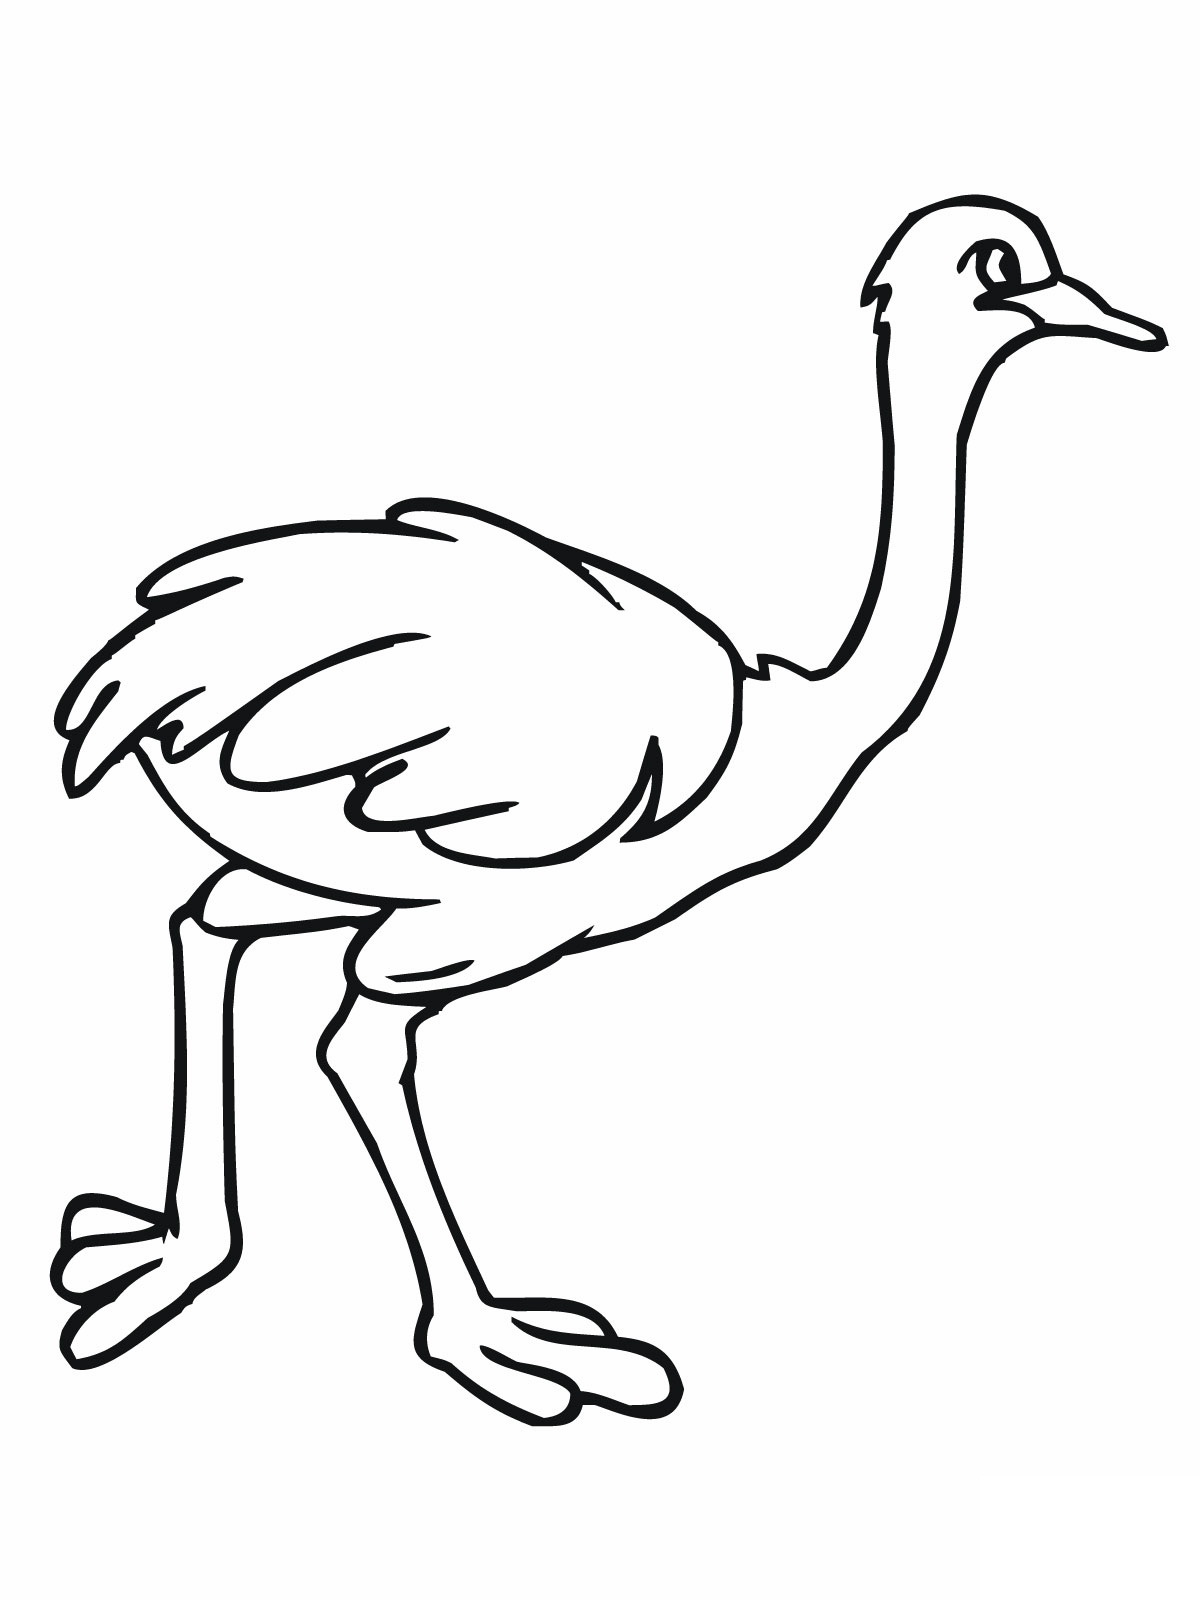 Free Printable Ostrich Coloring Pages For Kids Coloring Wallpapers Download Free Images Wallpaper [coloring654.blogspot.com]